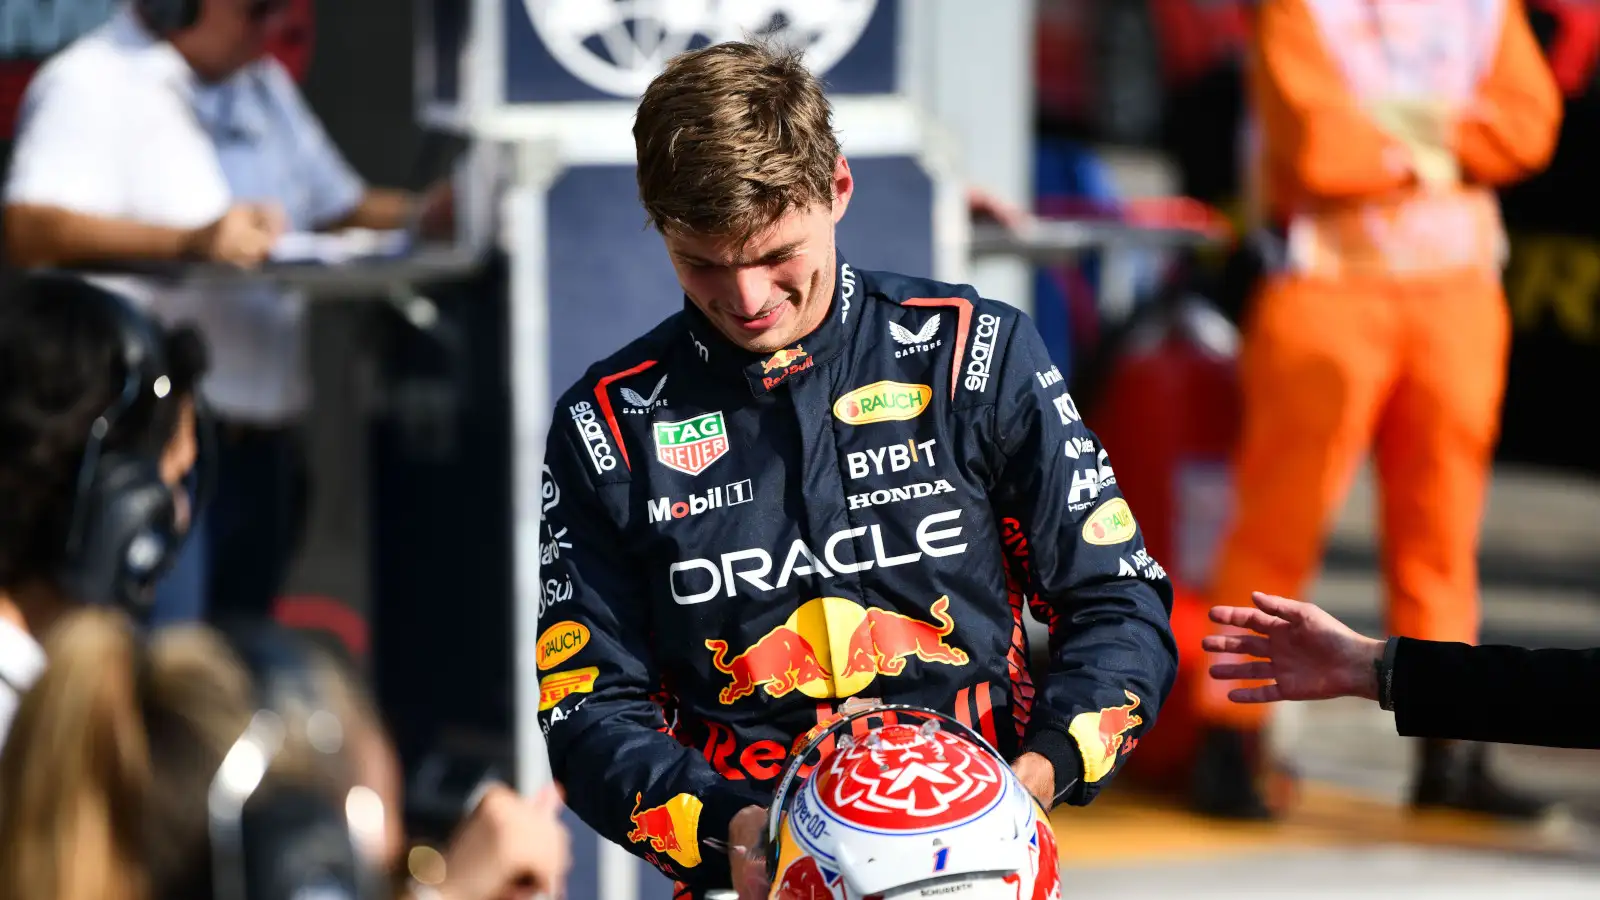 Red Bull driver Max Verstappen smiling as he puts his helmet down after another good session.